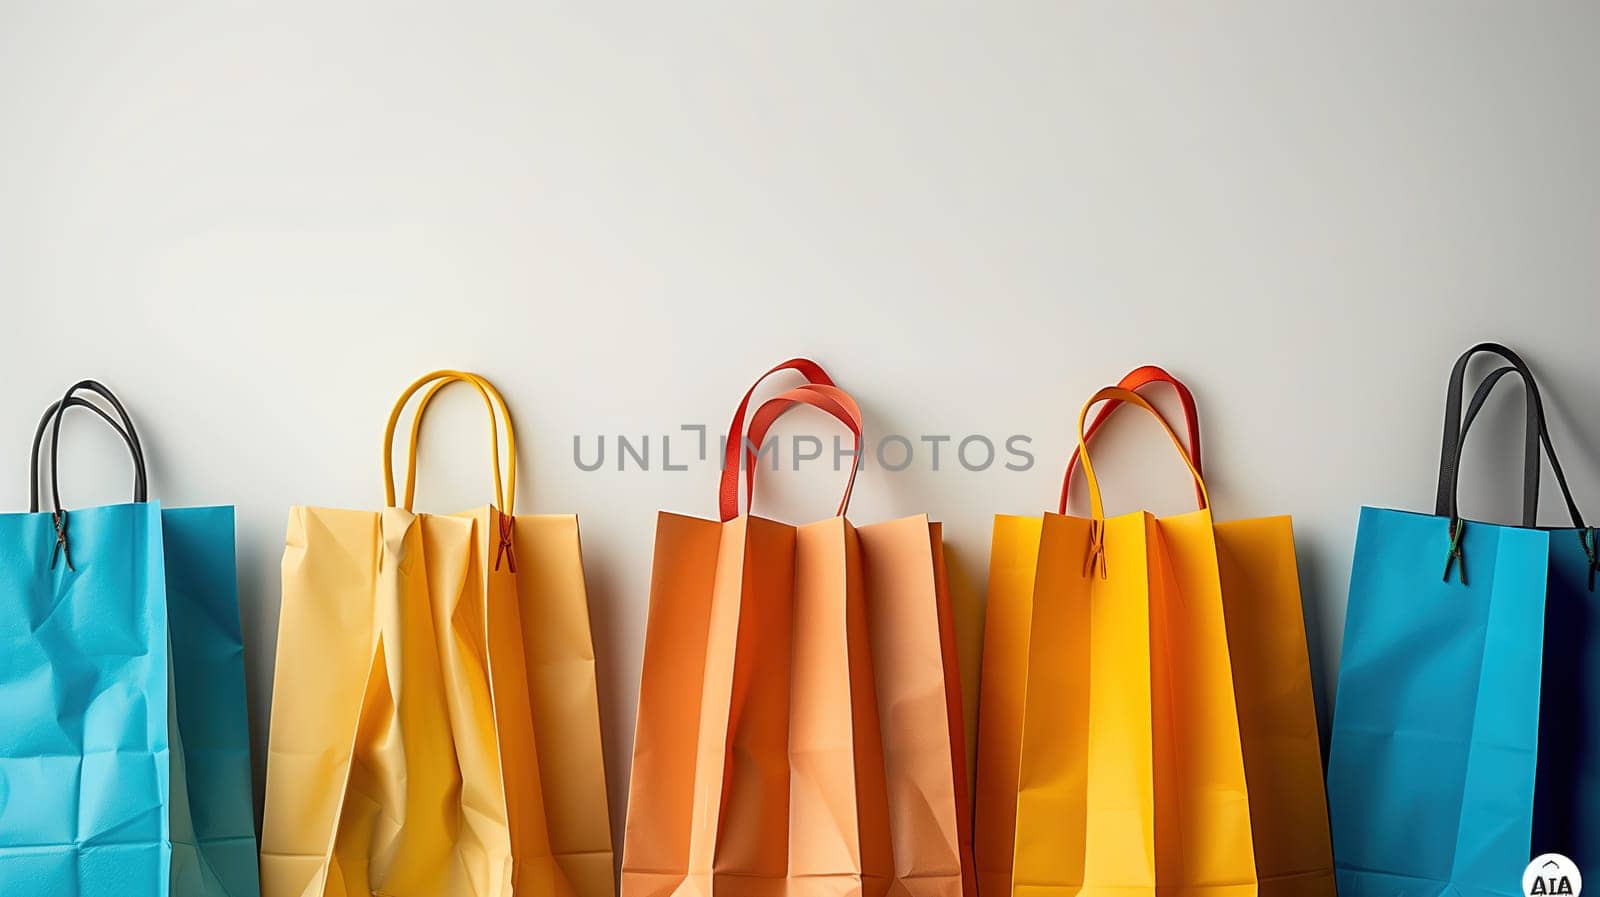 A row of vibrant shopping bags in various colors and sizes hanging neatly against a wall. The bags are displayed in a sale or Black Friday concept, ready to be filled with purchases.